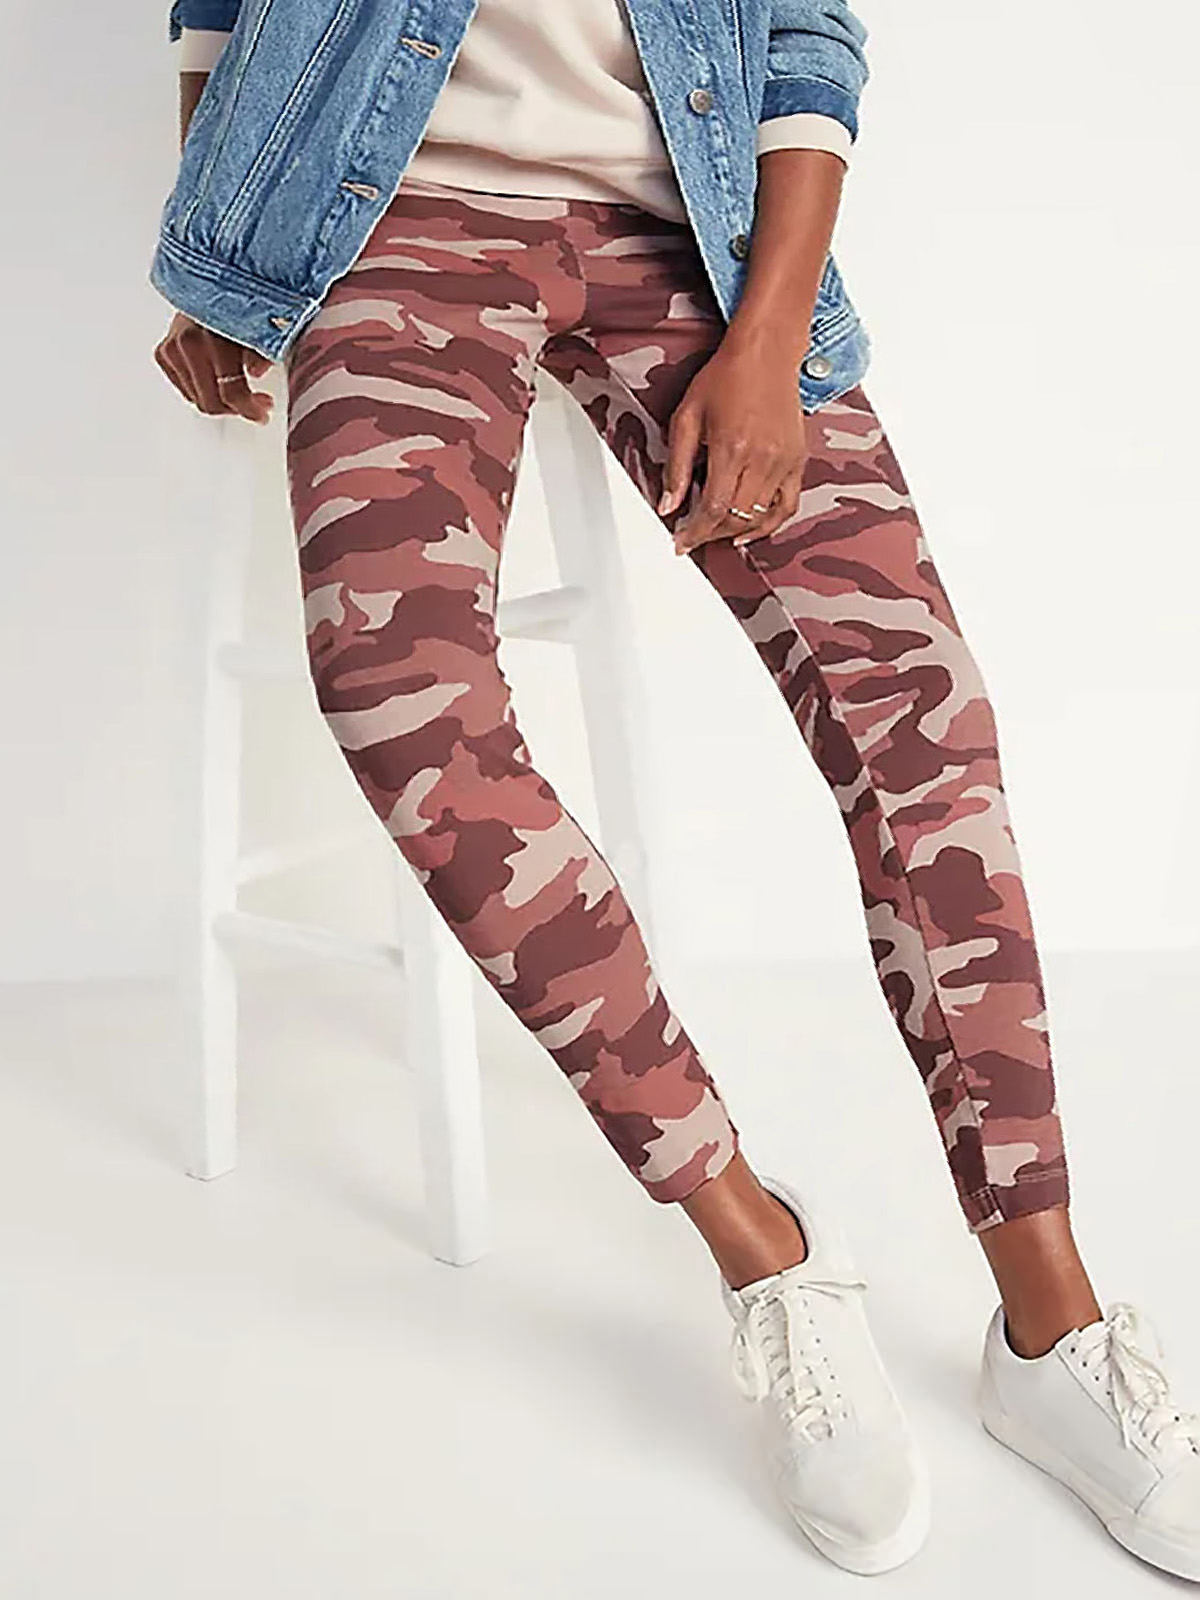 Old Navy - - Old Navy PINK CAMO Print High-Waisted Leggings - Size